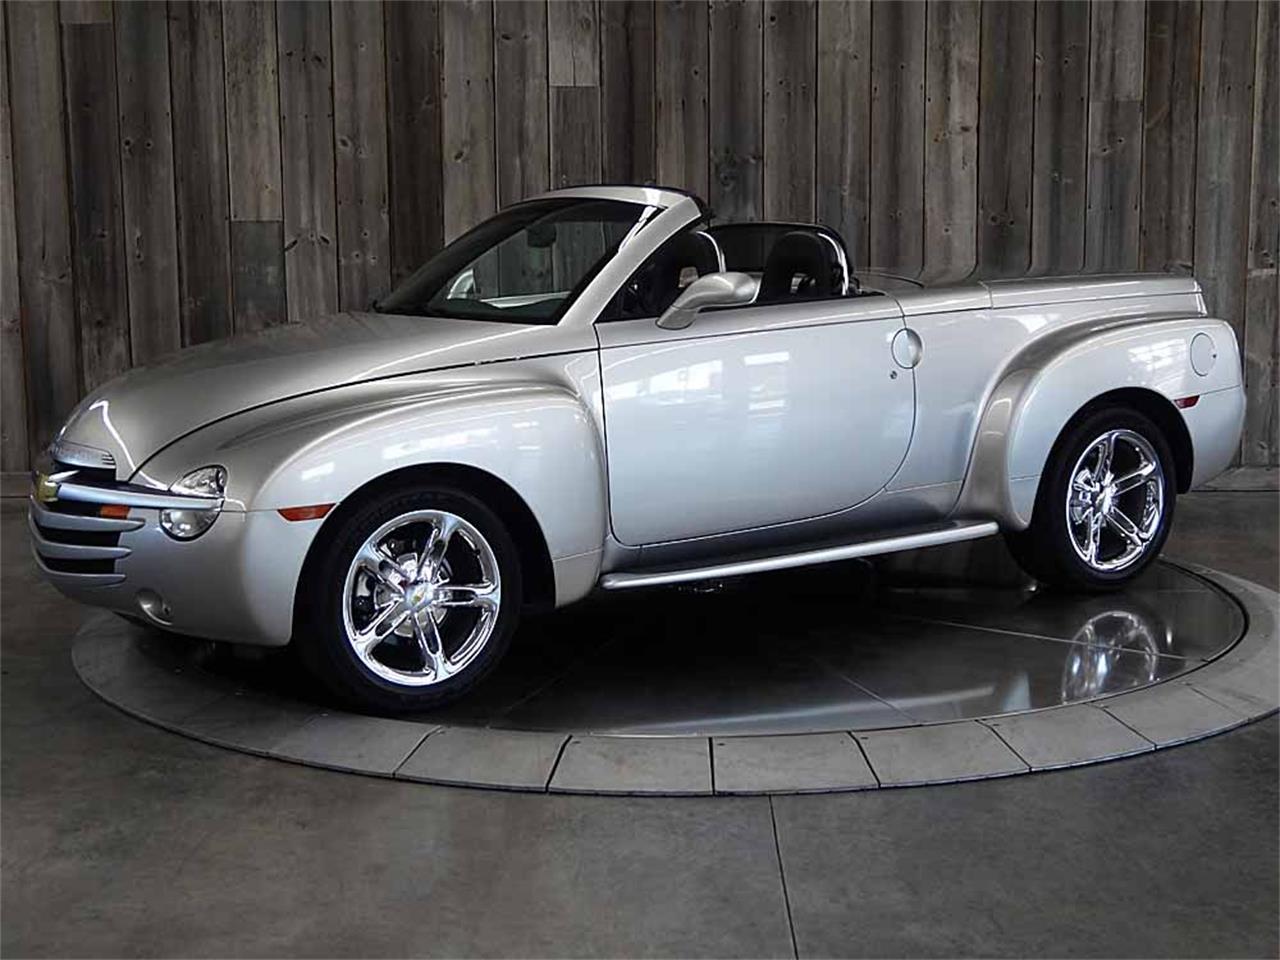 2005 Chevrolet SSR for sale in Bettendorf, IA – photo 51